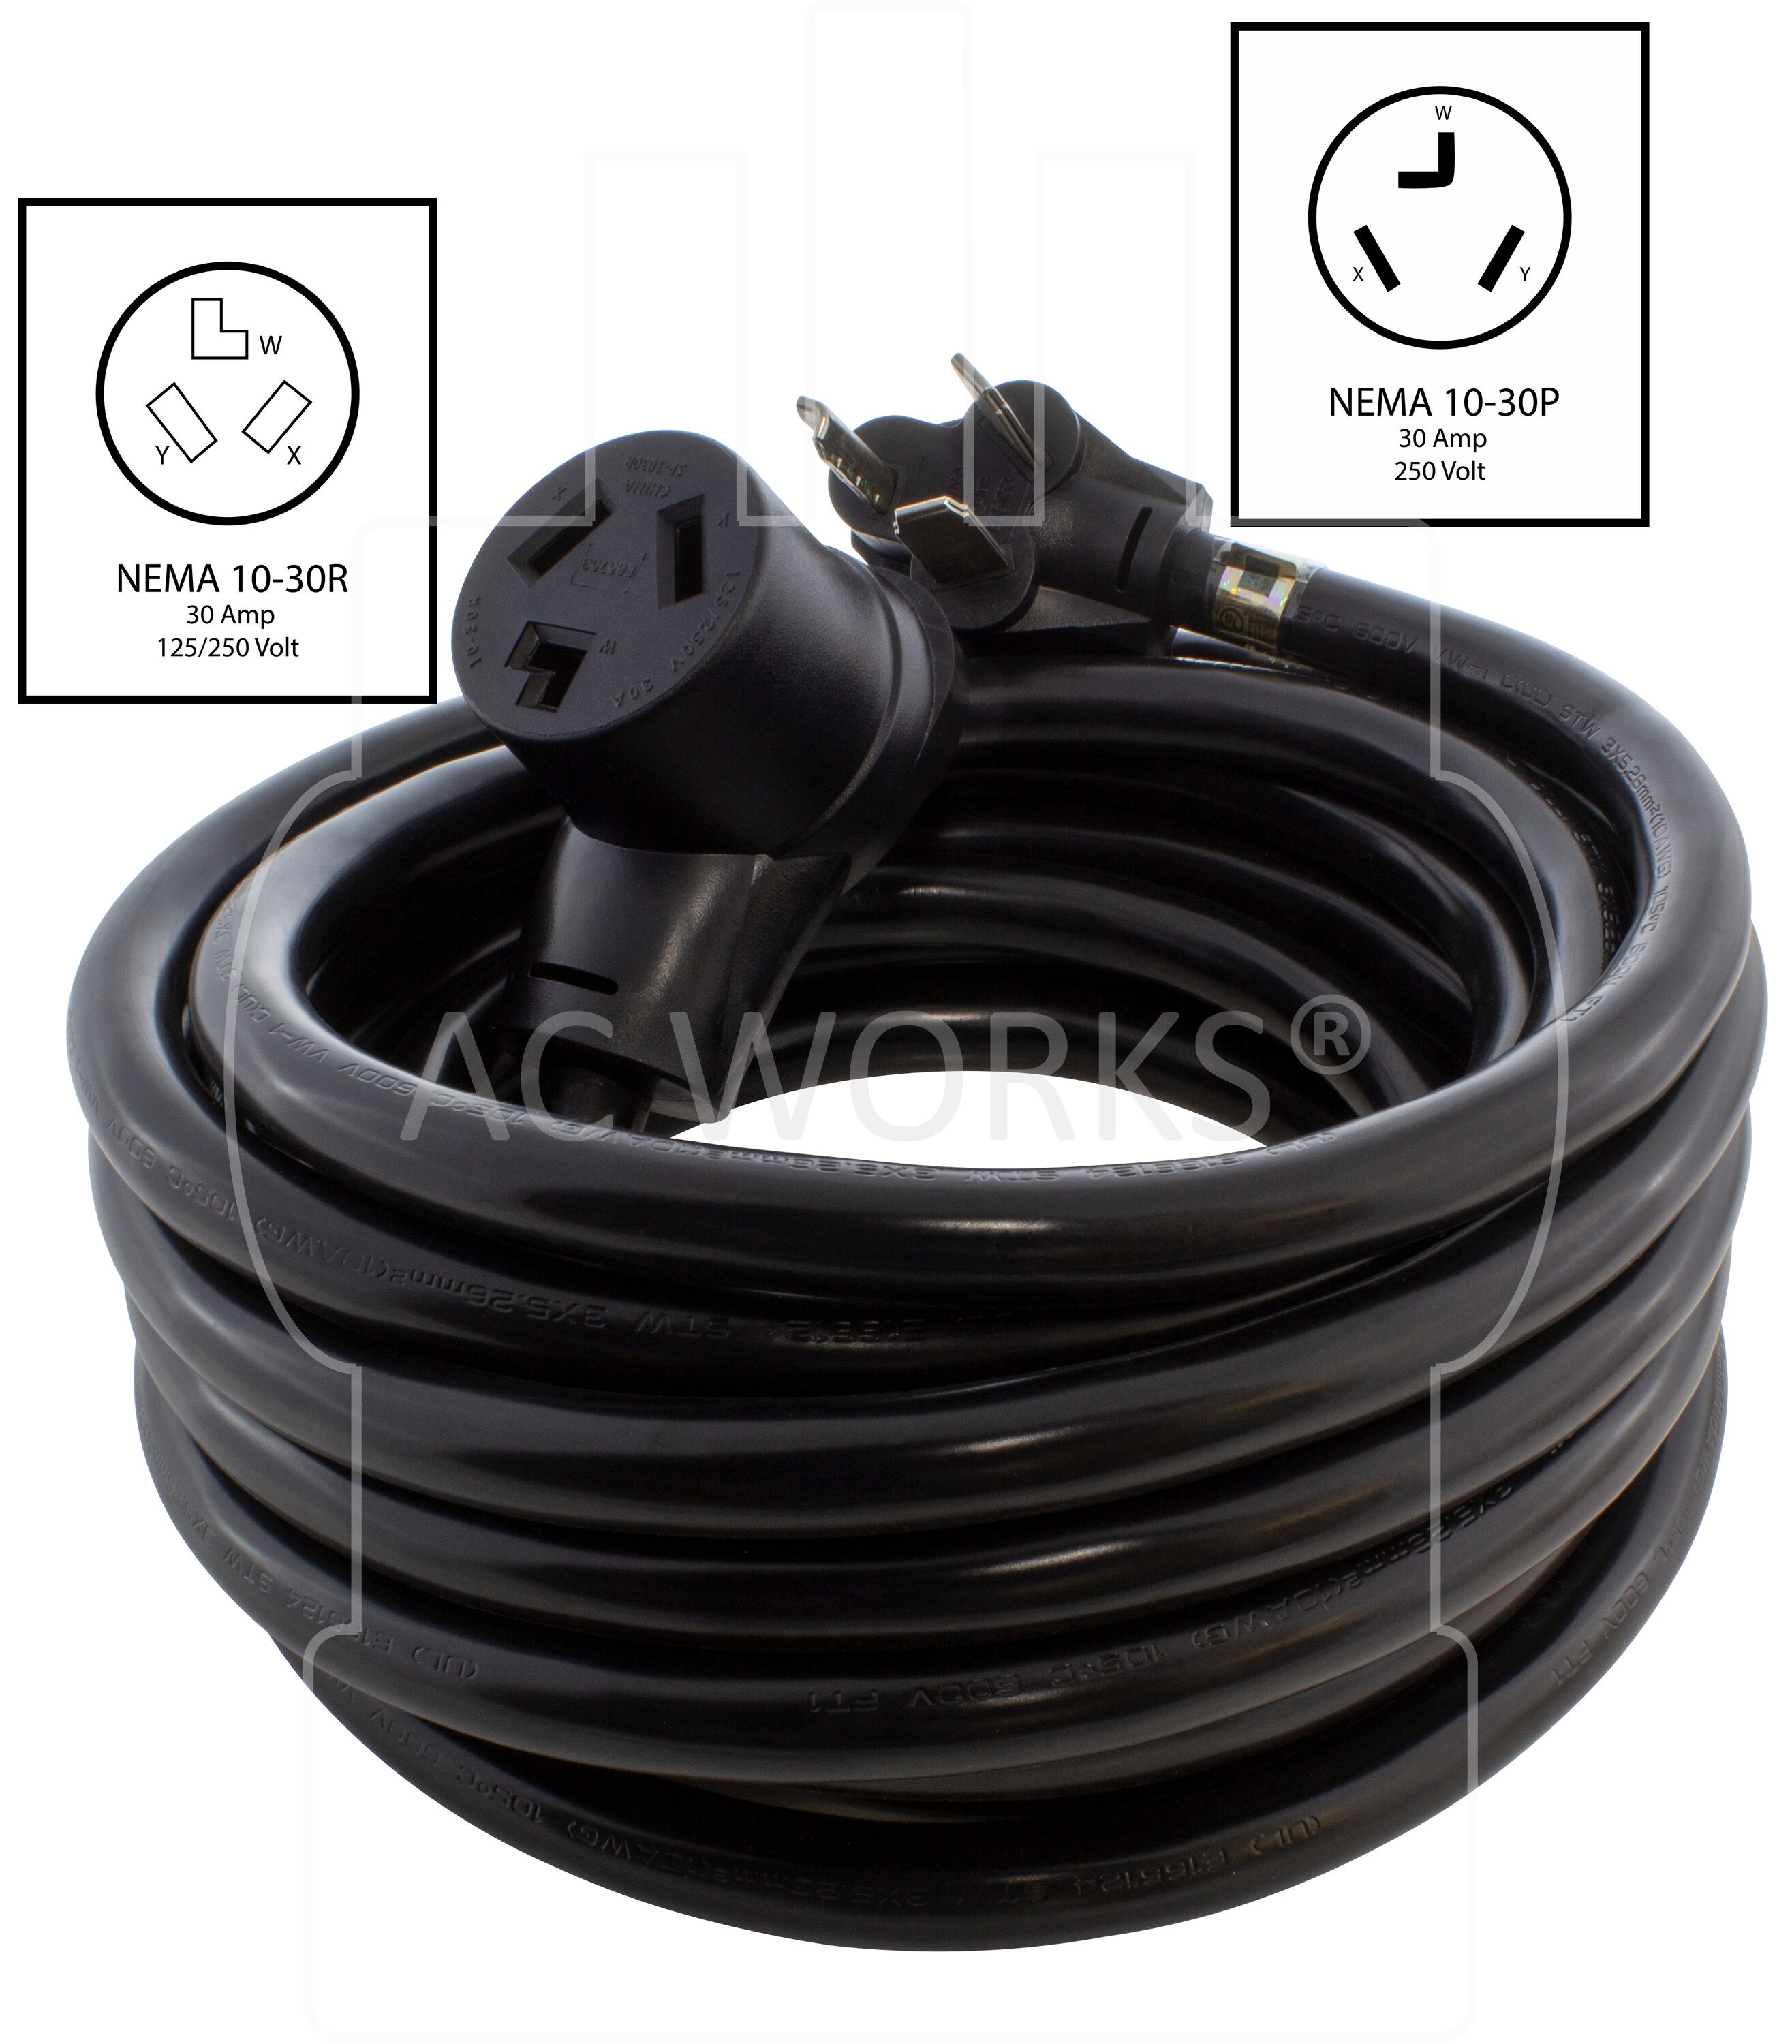 Conntek CS6364 50-amp 125/250-volt Generator Power Cord Connector for up to 1250 for sale online 